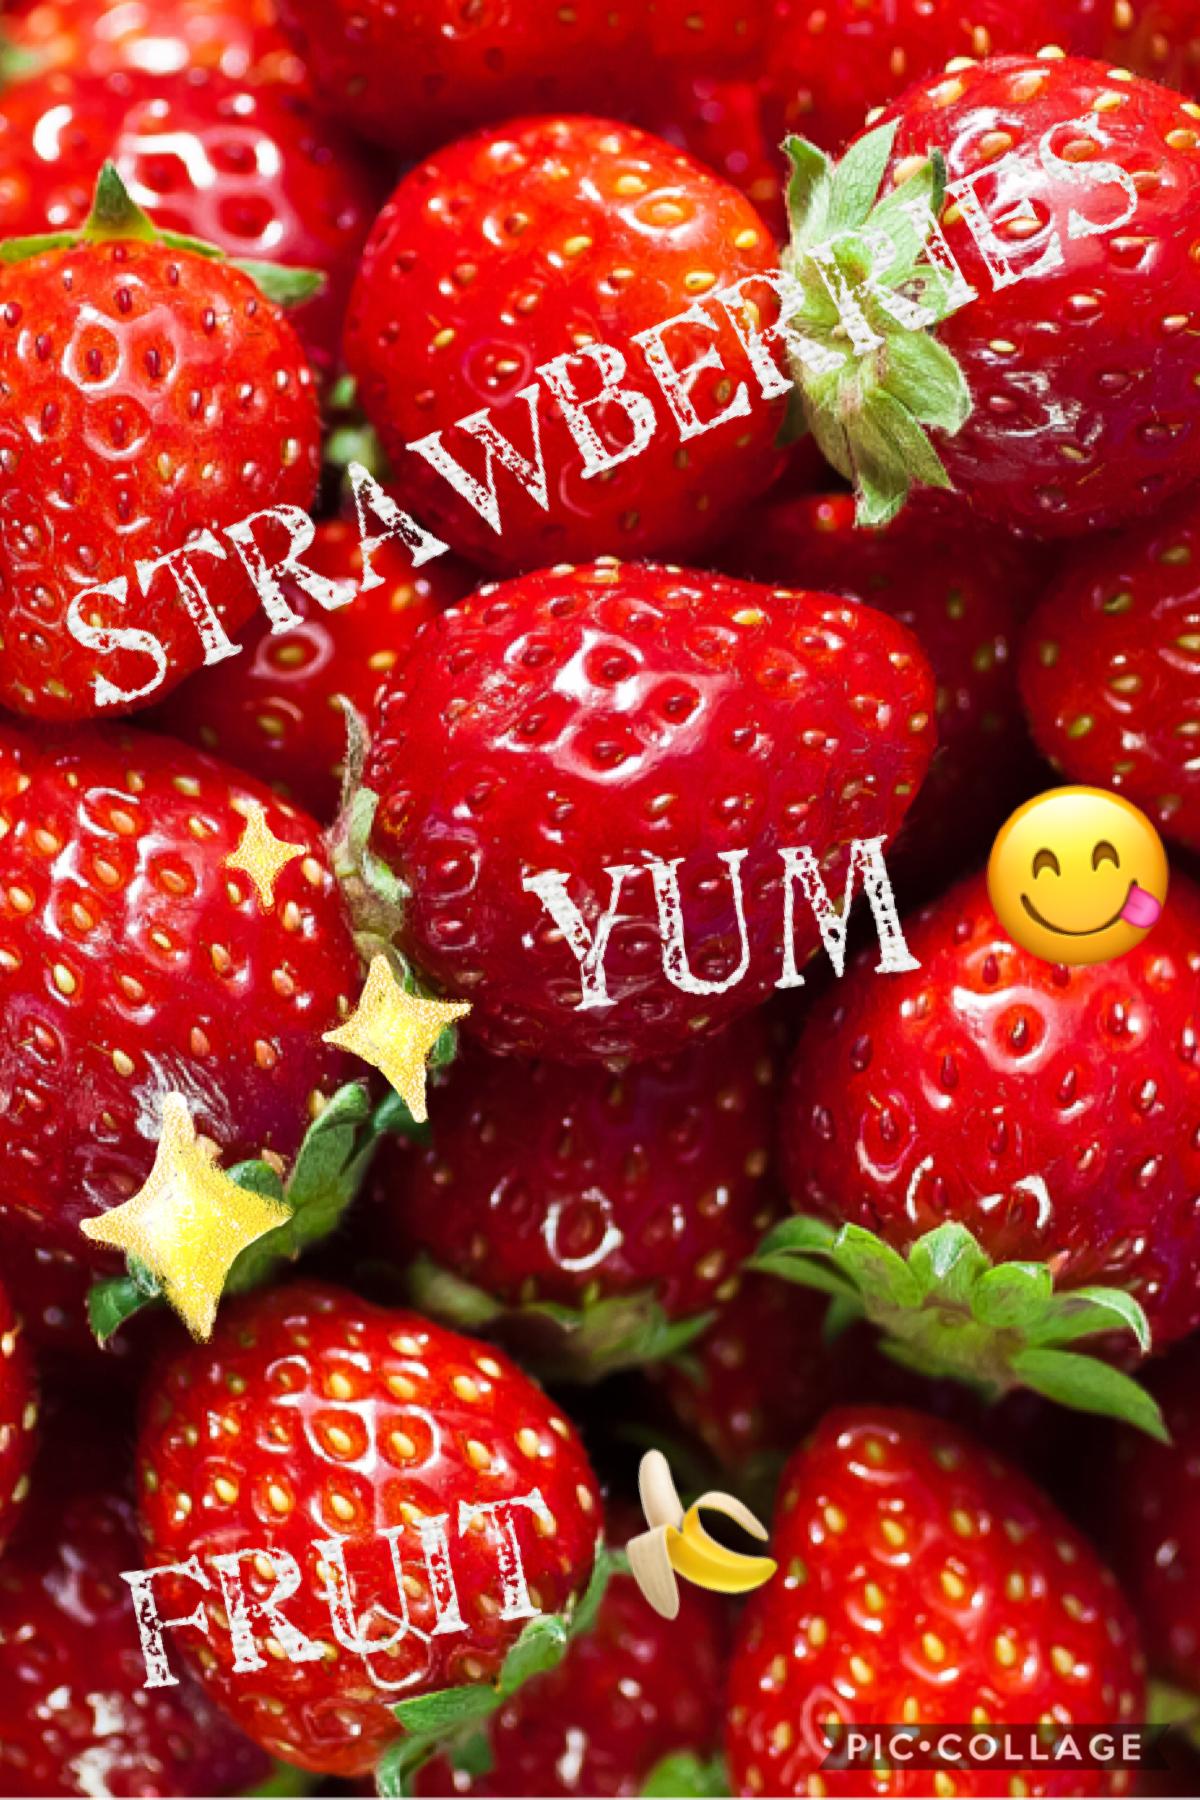 Yum who else likes strawberries comment if you do! Also follow me!! And like!